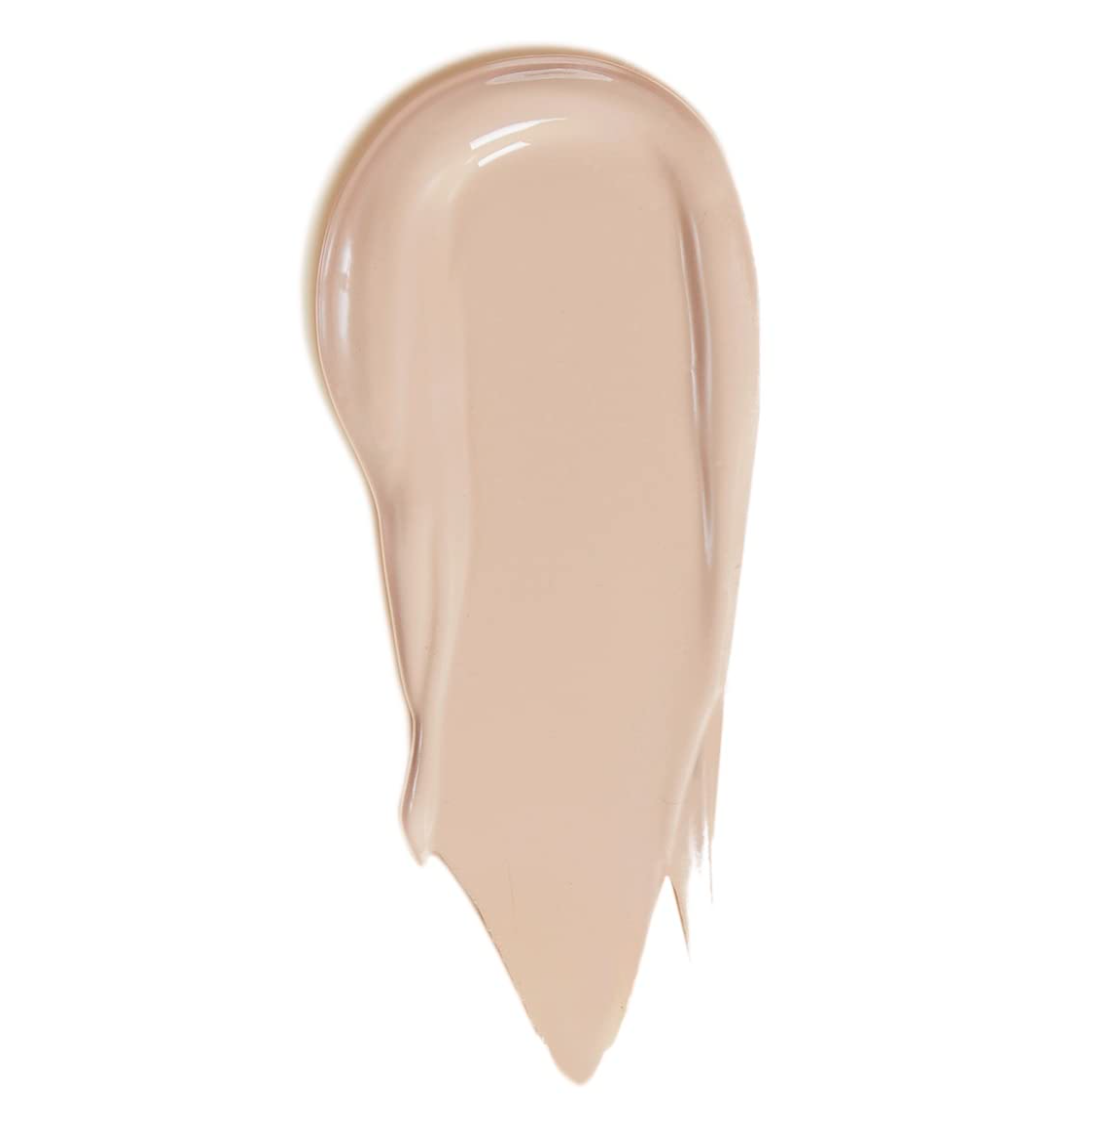 Hourglass Ambient Soft Glow Foundation